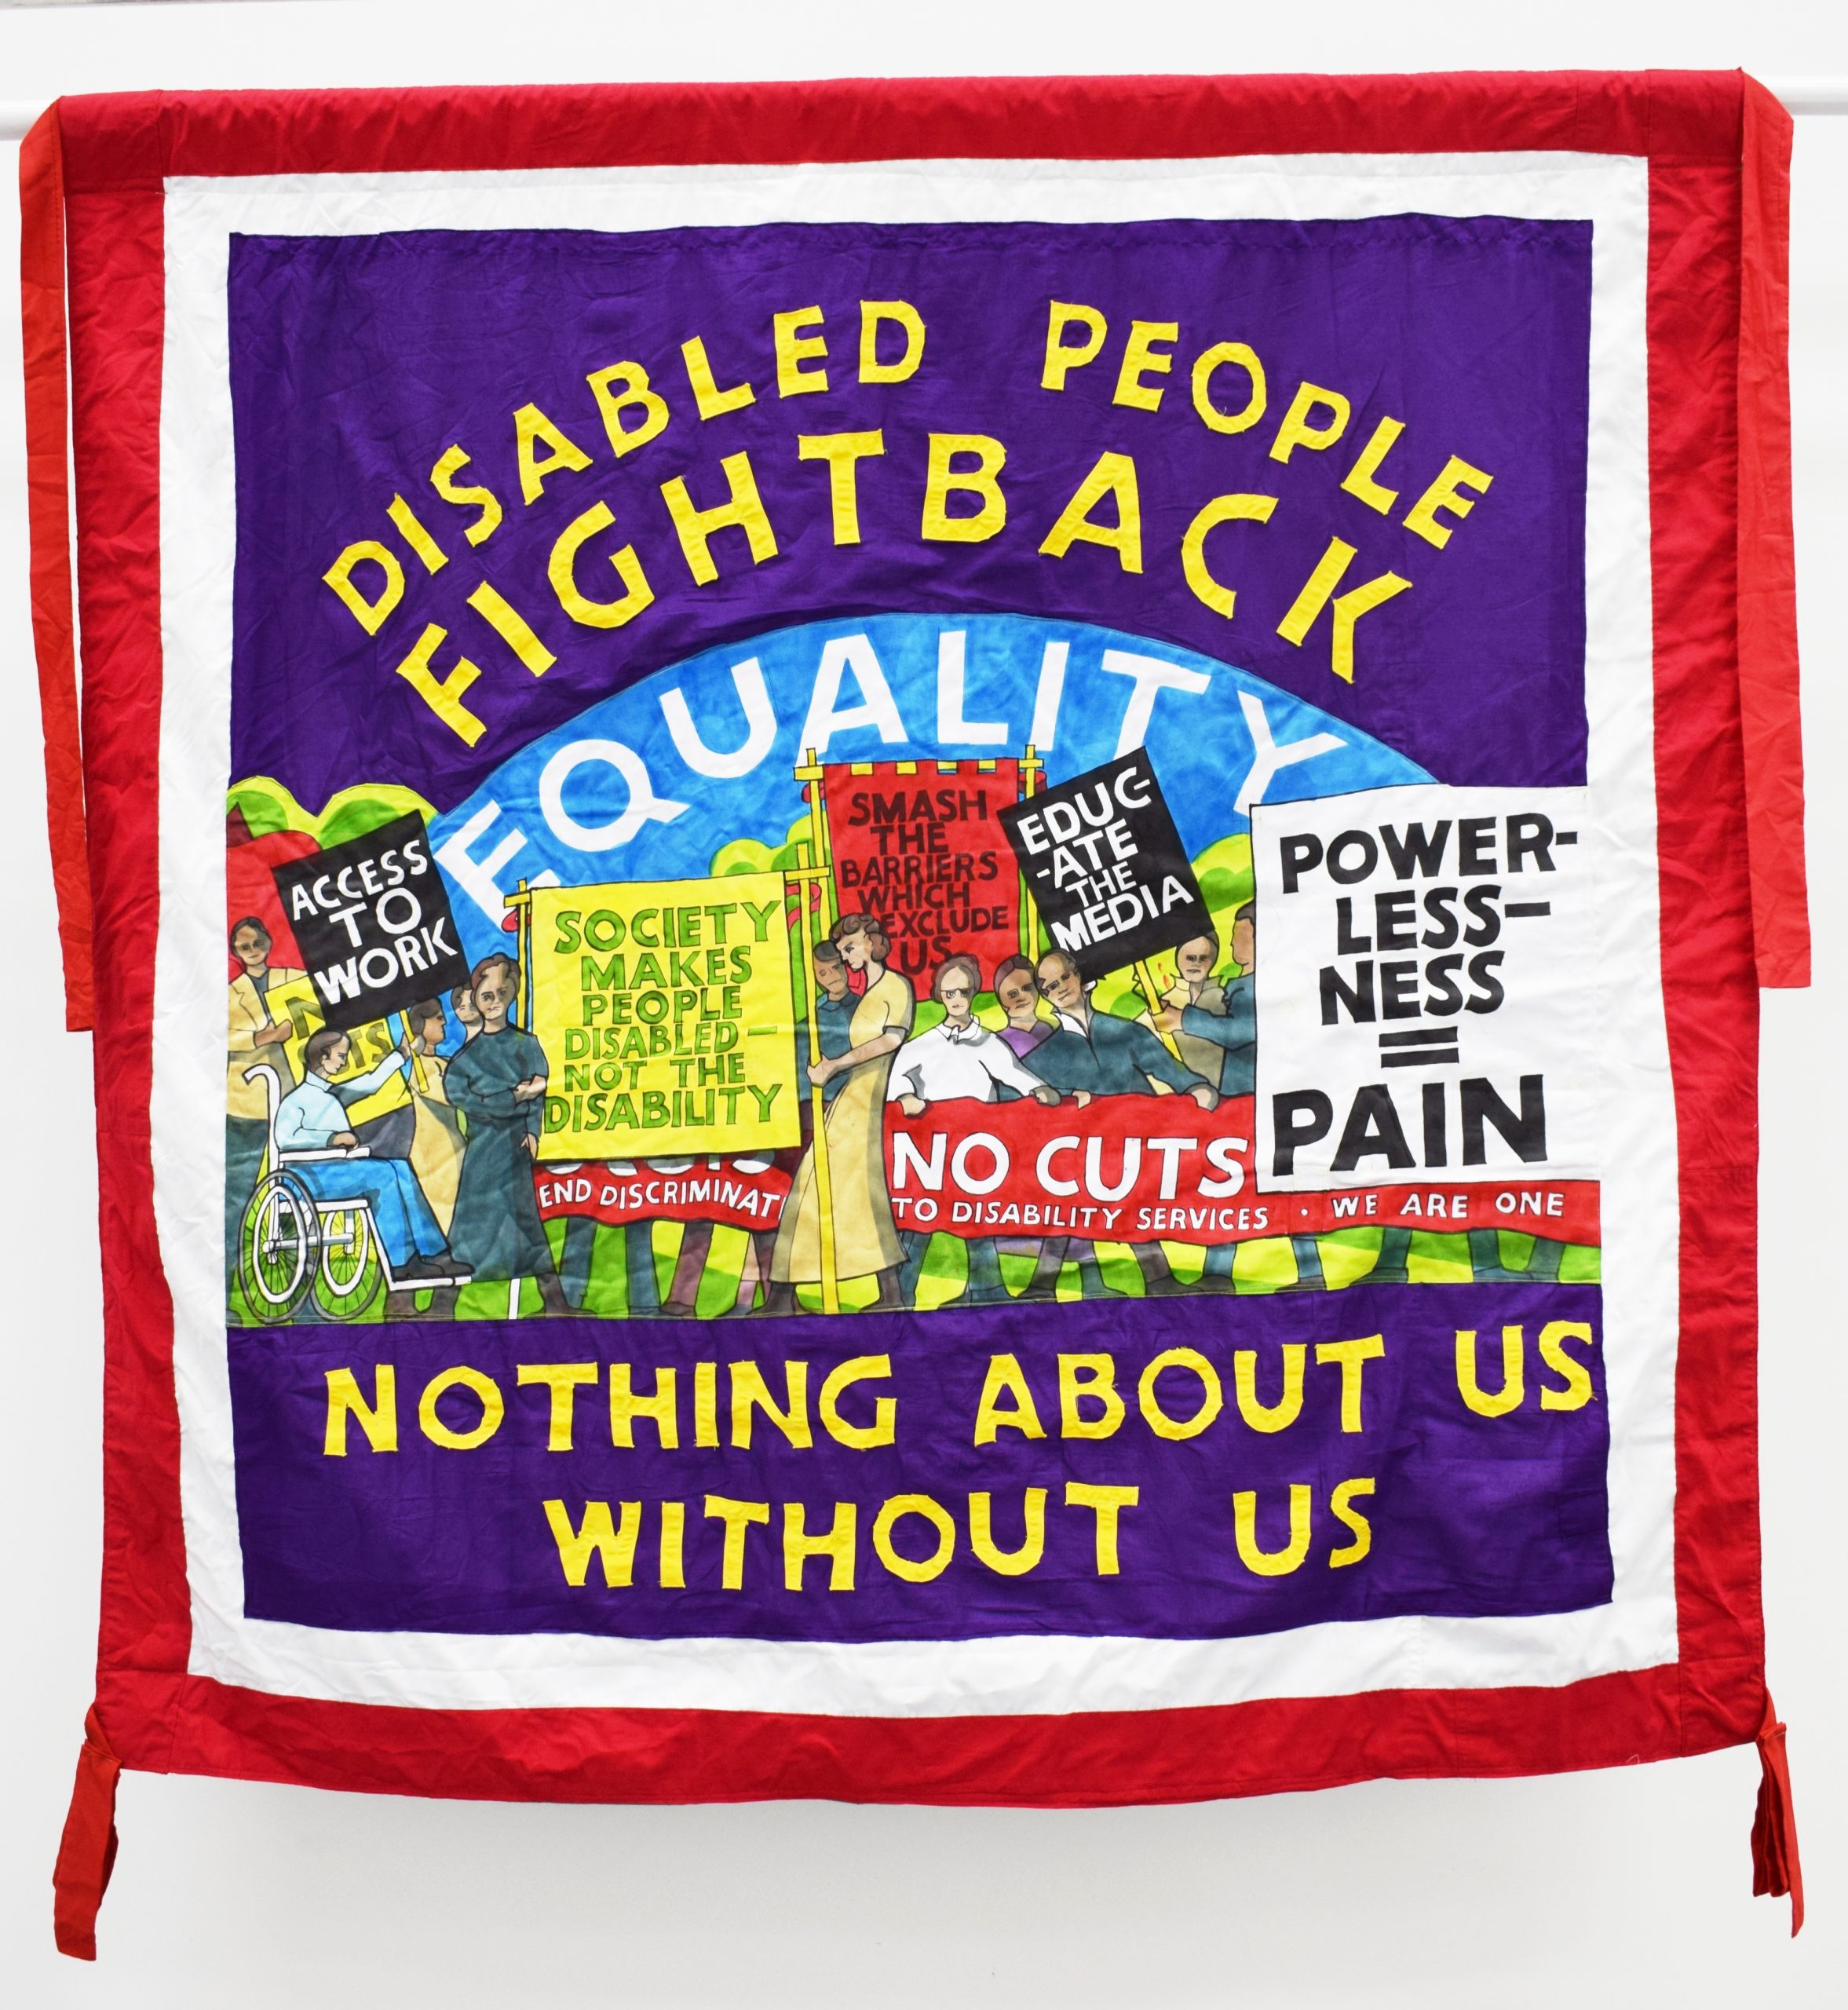 Disabled People Fight Back banner by Ed Hall, Manchester, 2015 © Greater Manchester Coalition of Disabled People.